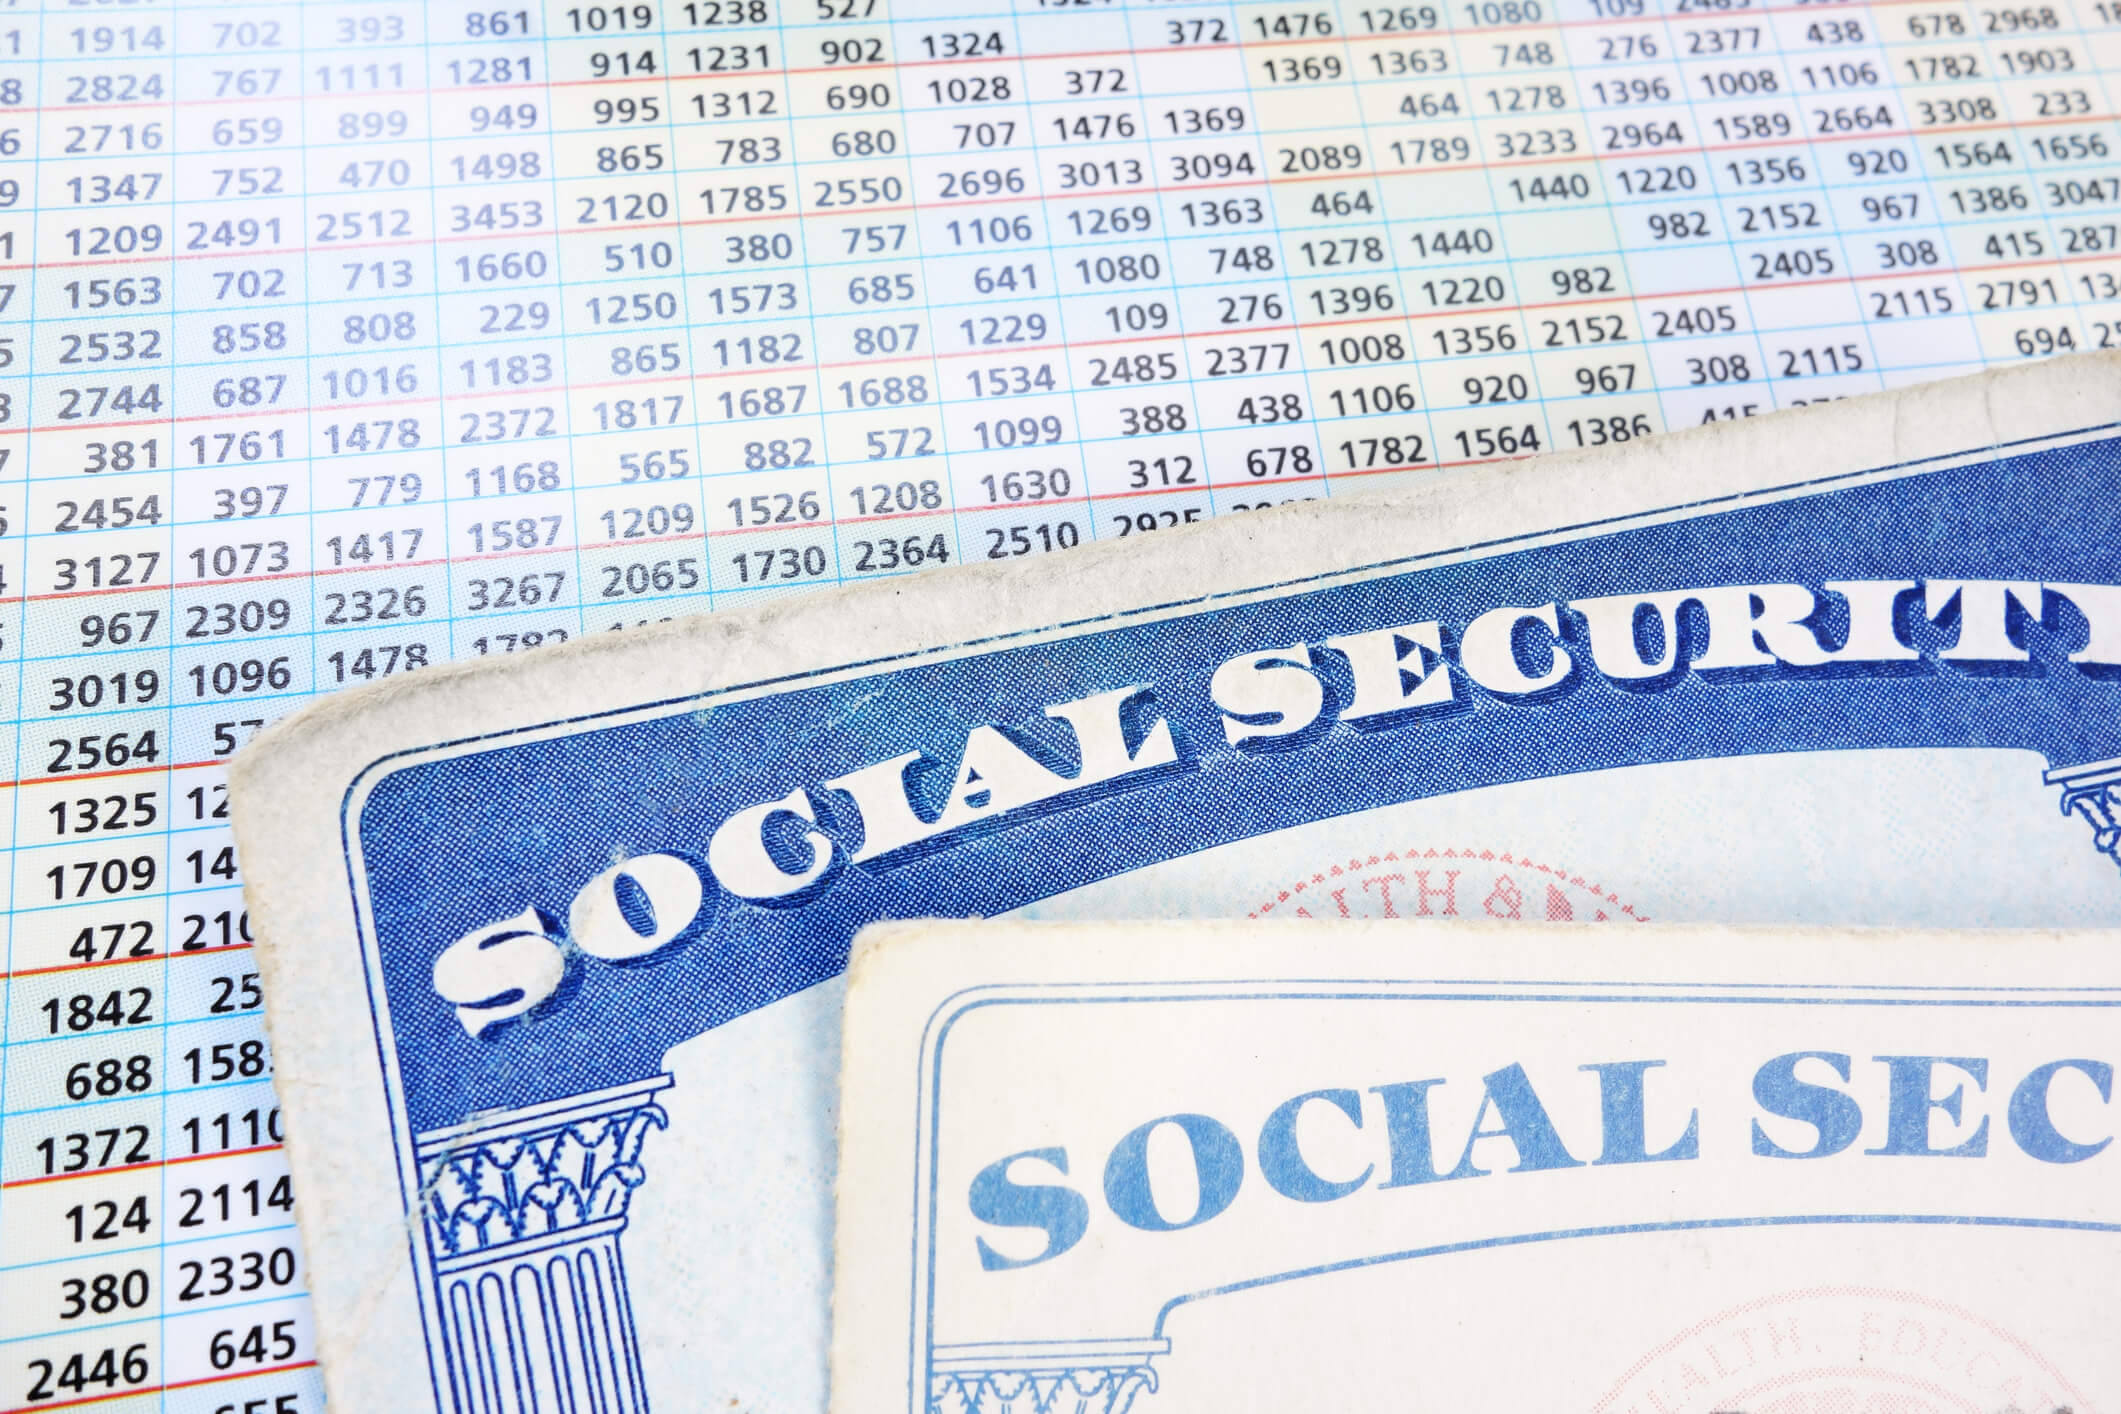 Social Security cards and numbers